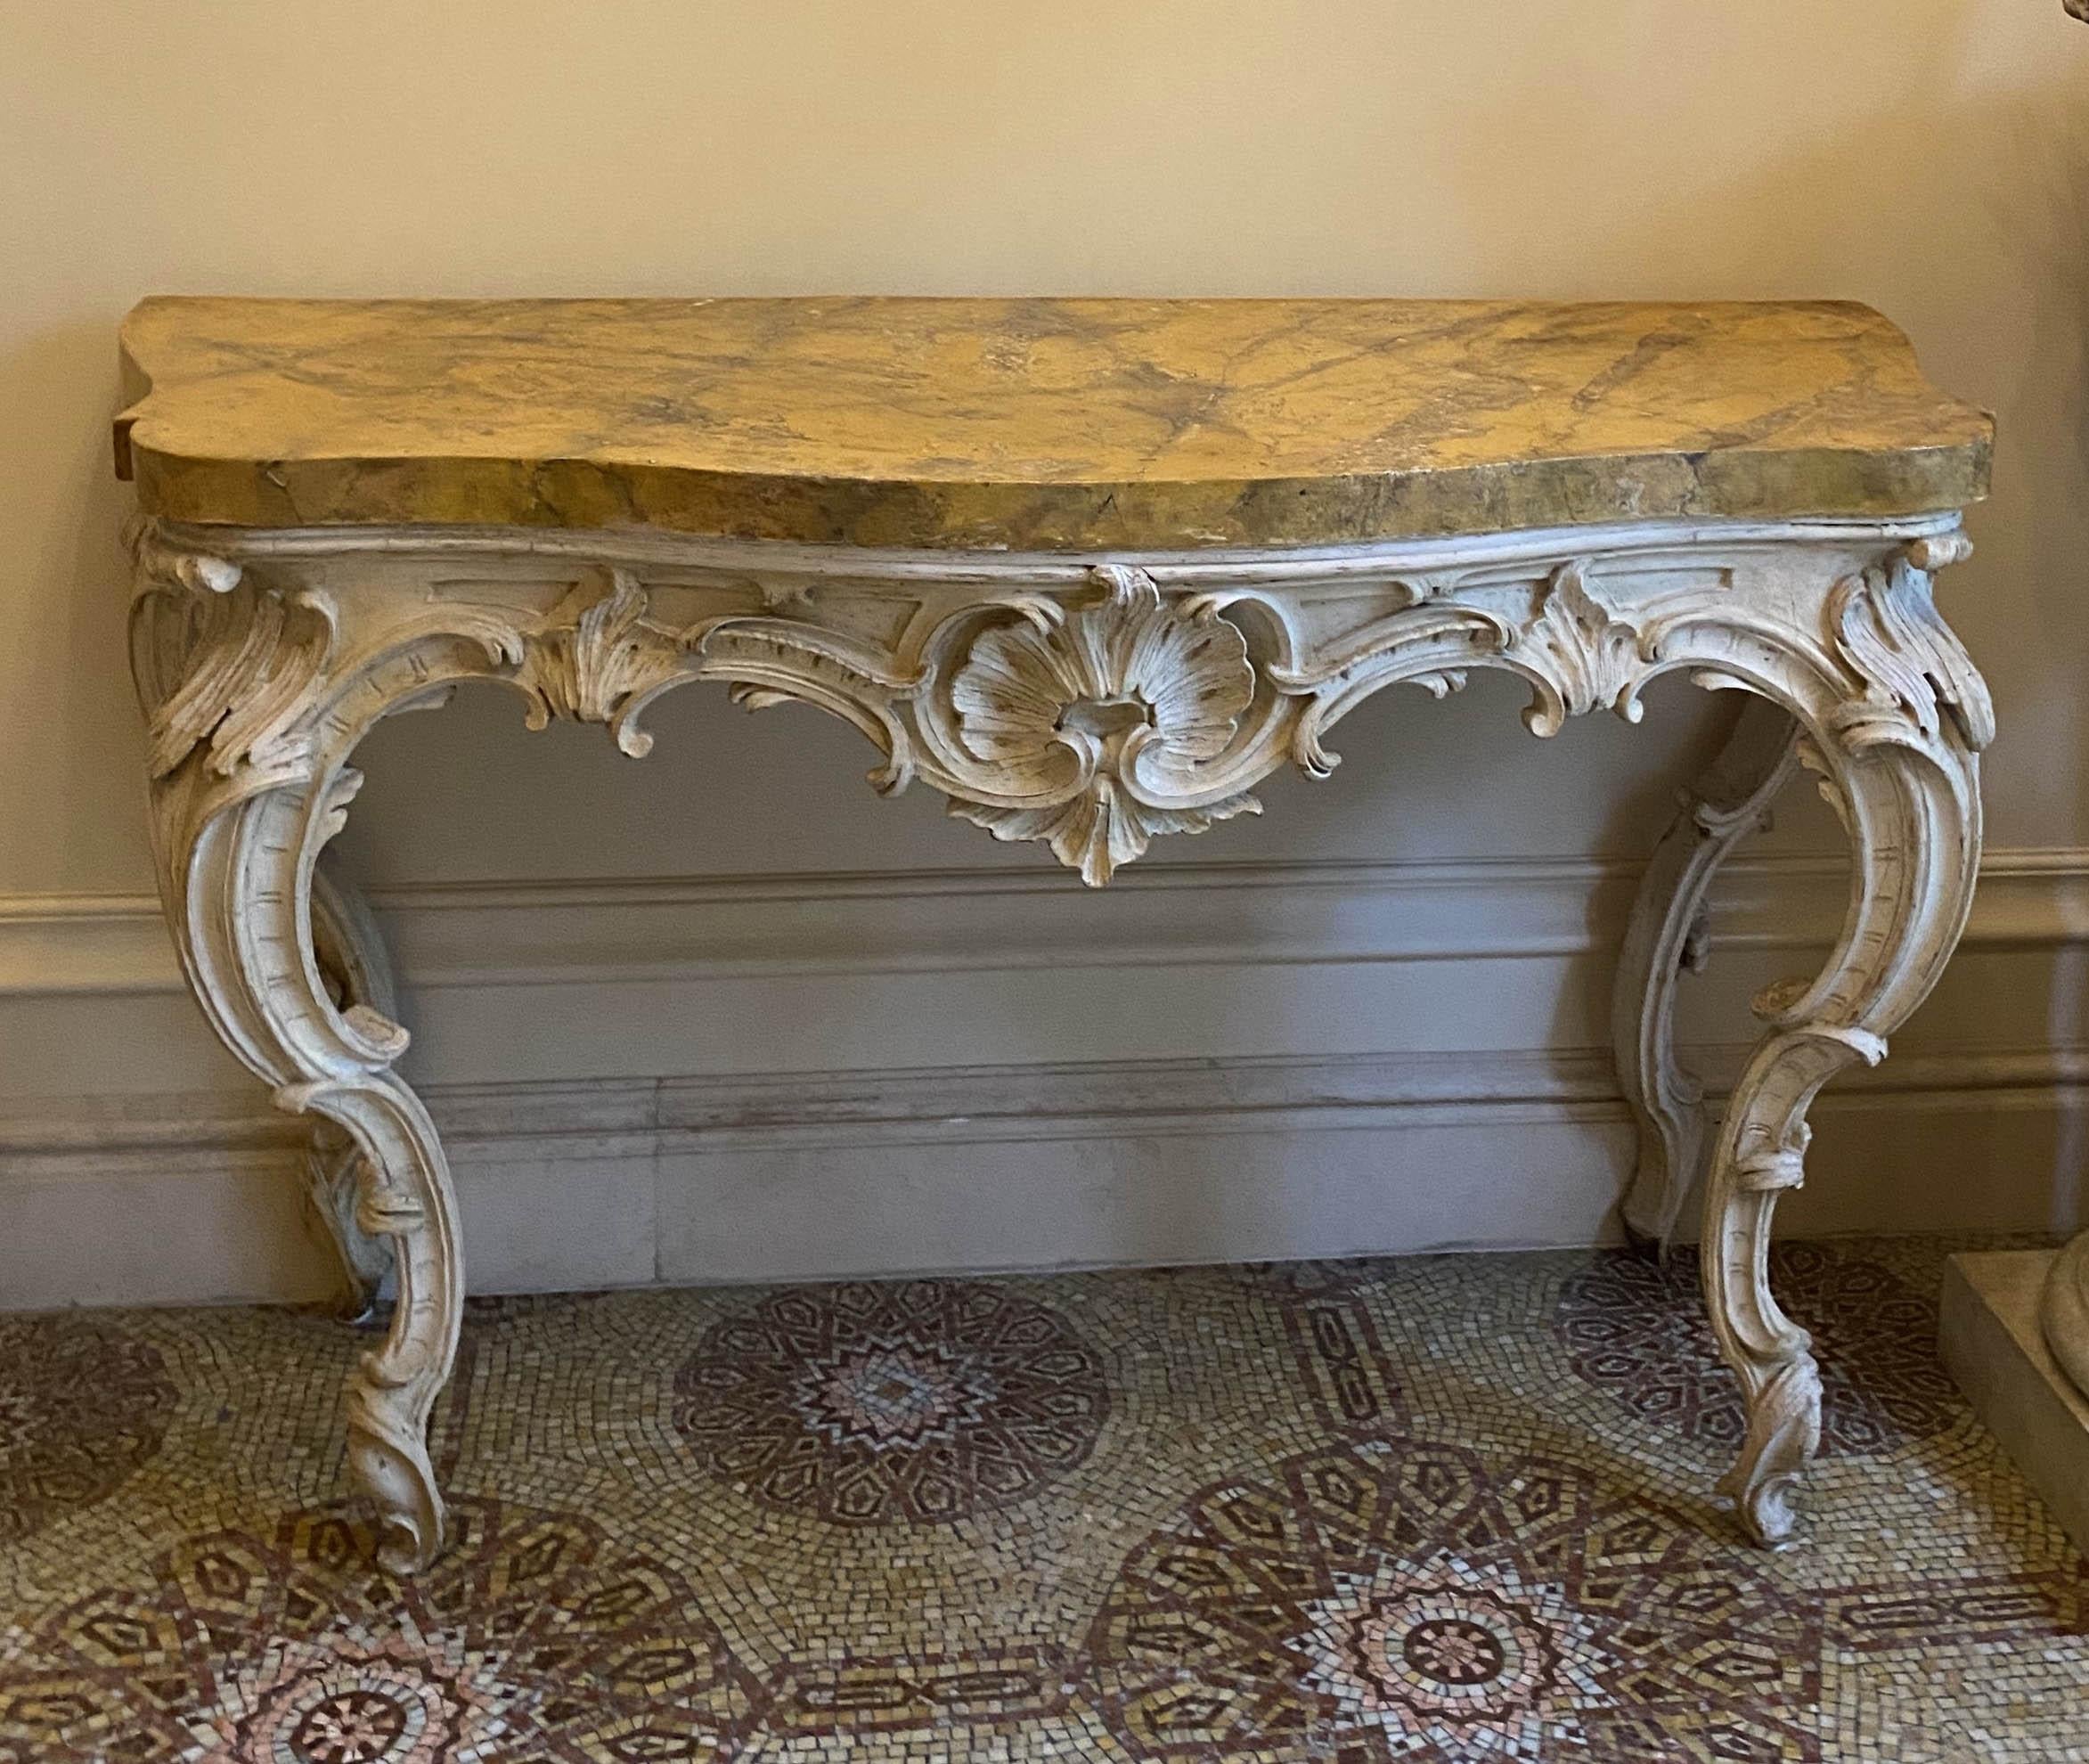 Finely carved Italian 18th century ivory painted console tables with a Siena Marble painted scalgliola top.
Originally the table was gilded.
Very good vintage condition.
 Proveniance from a Roman aristocratic estate.